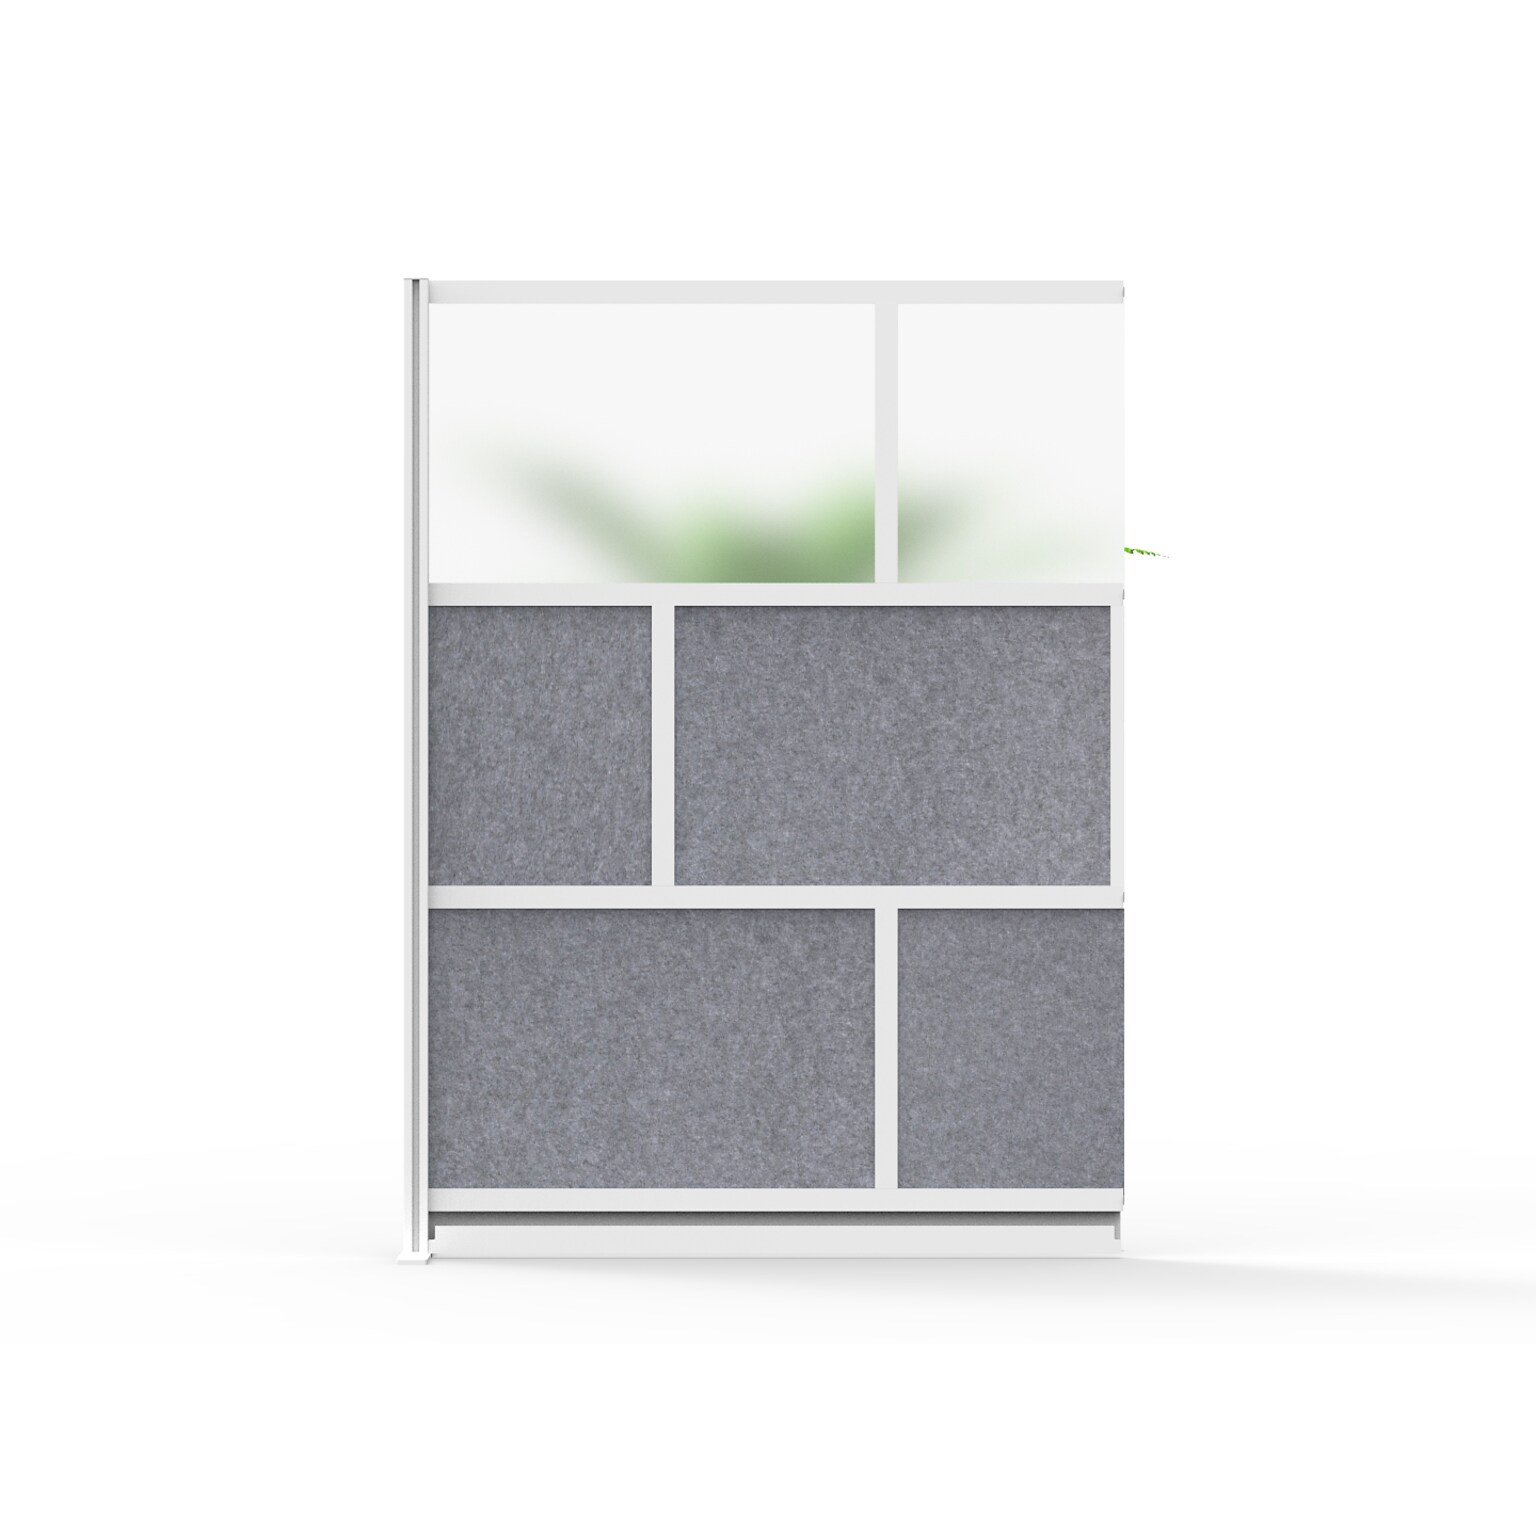 Luxor Modular Room Divider Add-On Wall, 70H x 53W, Gray/Frosted PET/Acrylic (MW-5370-XFCG)